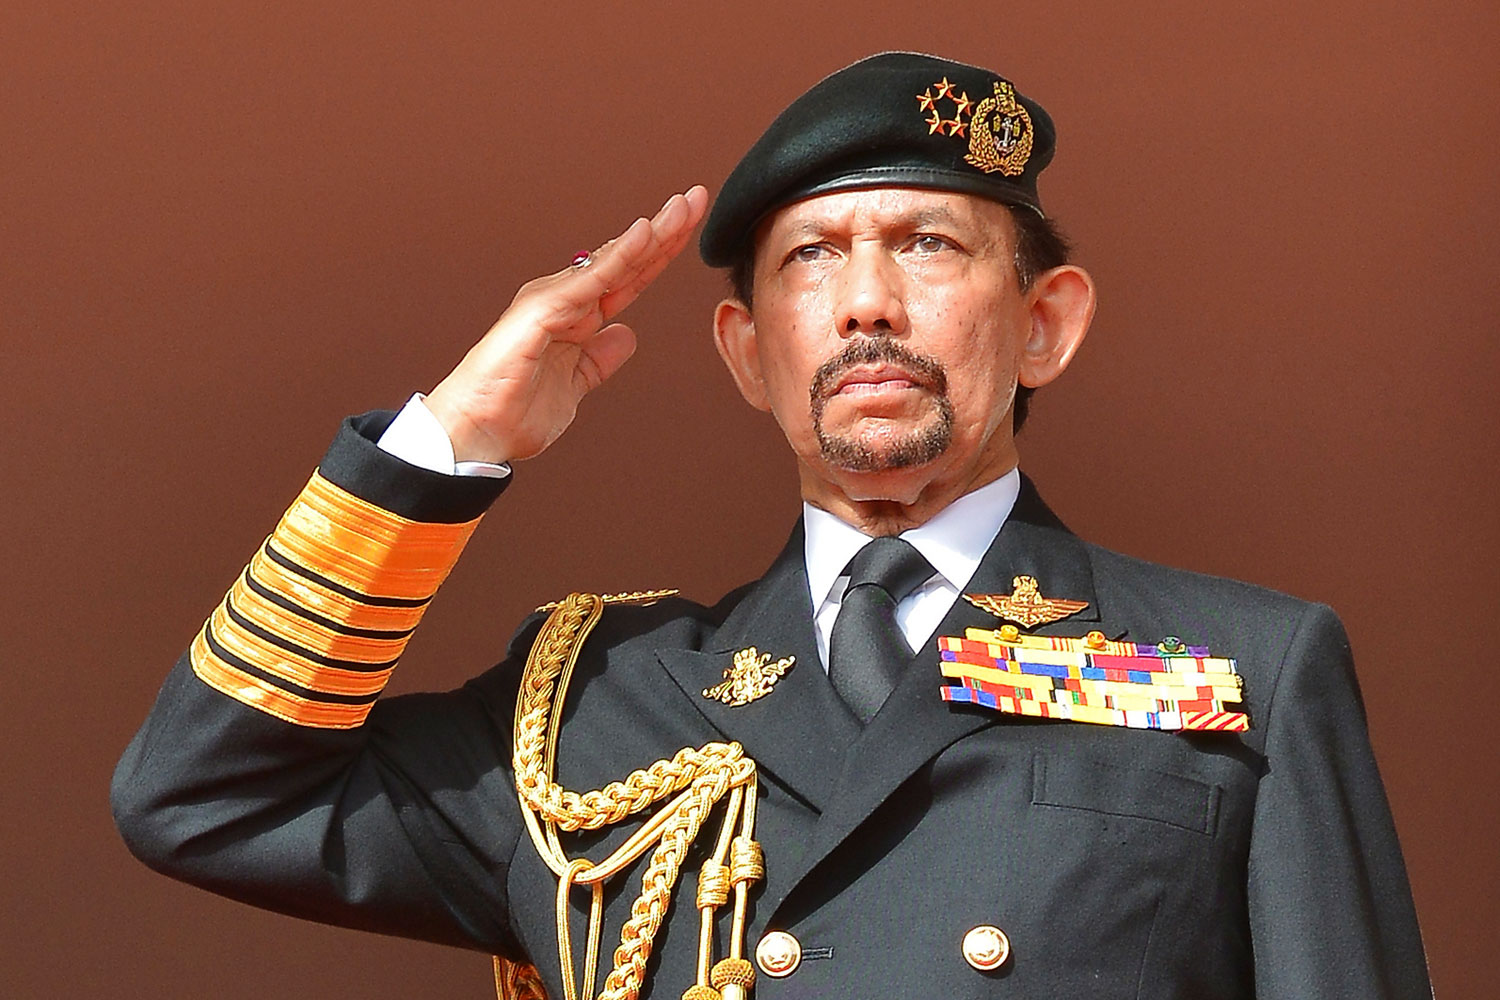 Brunei's Sultan Hassanal Bolkiah salutes as the national anthem is played during celebrations for Brunei's 30th National Day, in Bandar Seri Begawan on Feb. 23, 2014. (Ahim Rani—Reuters)